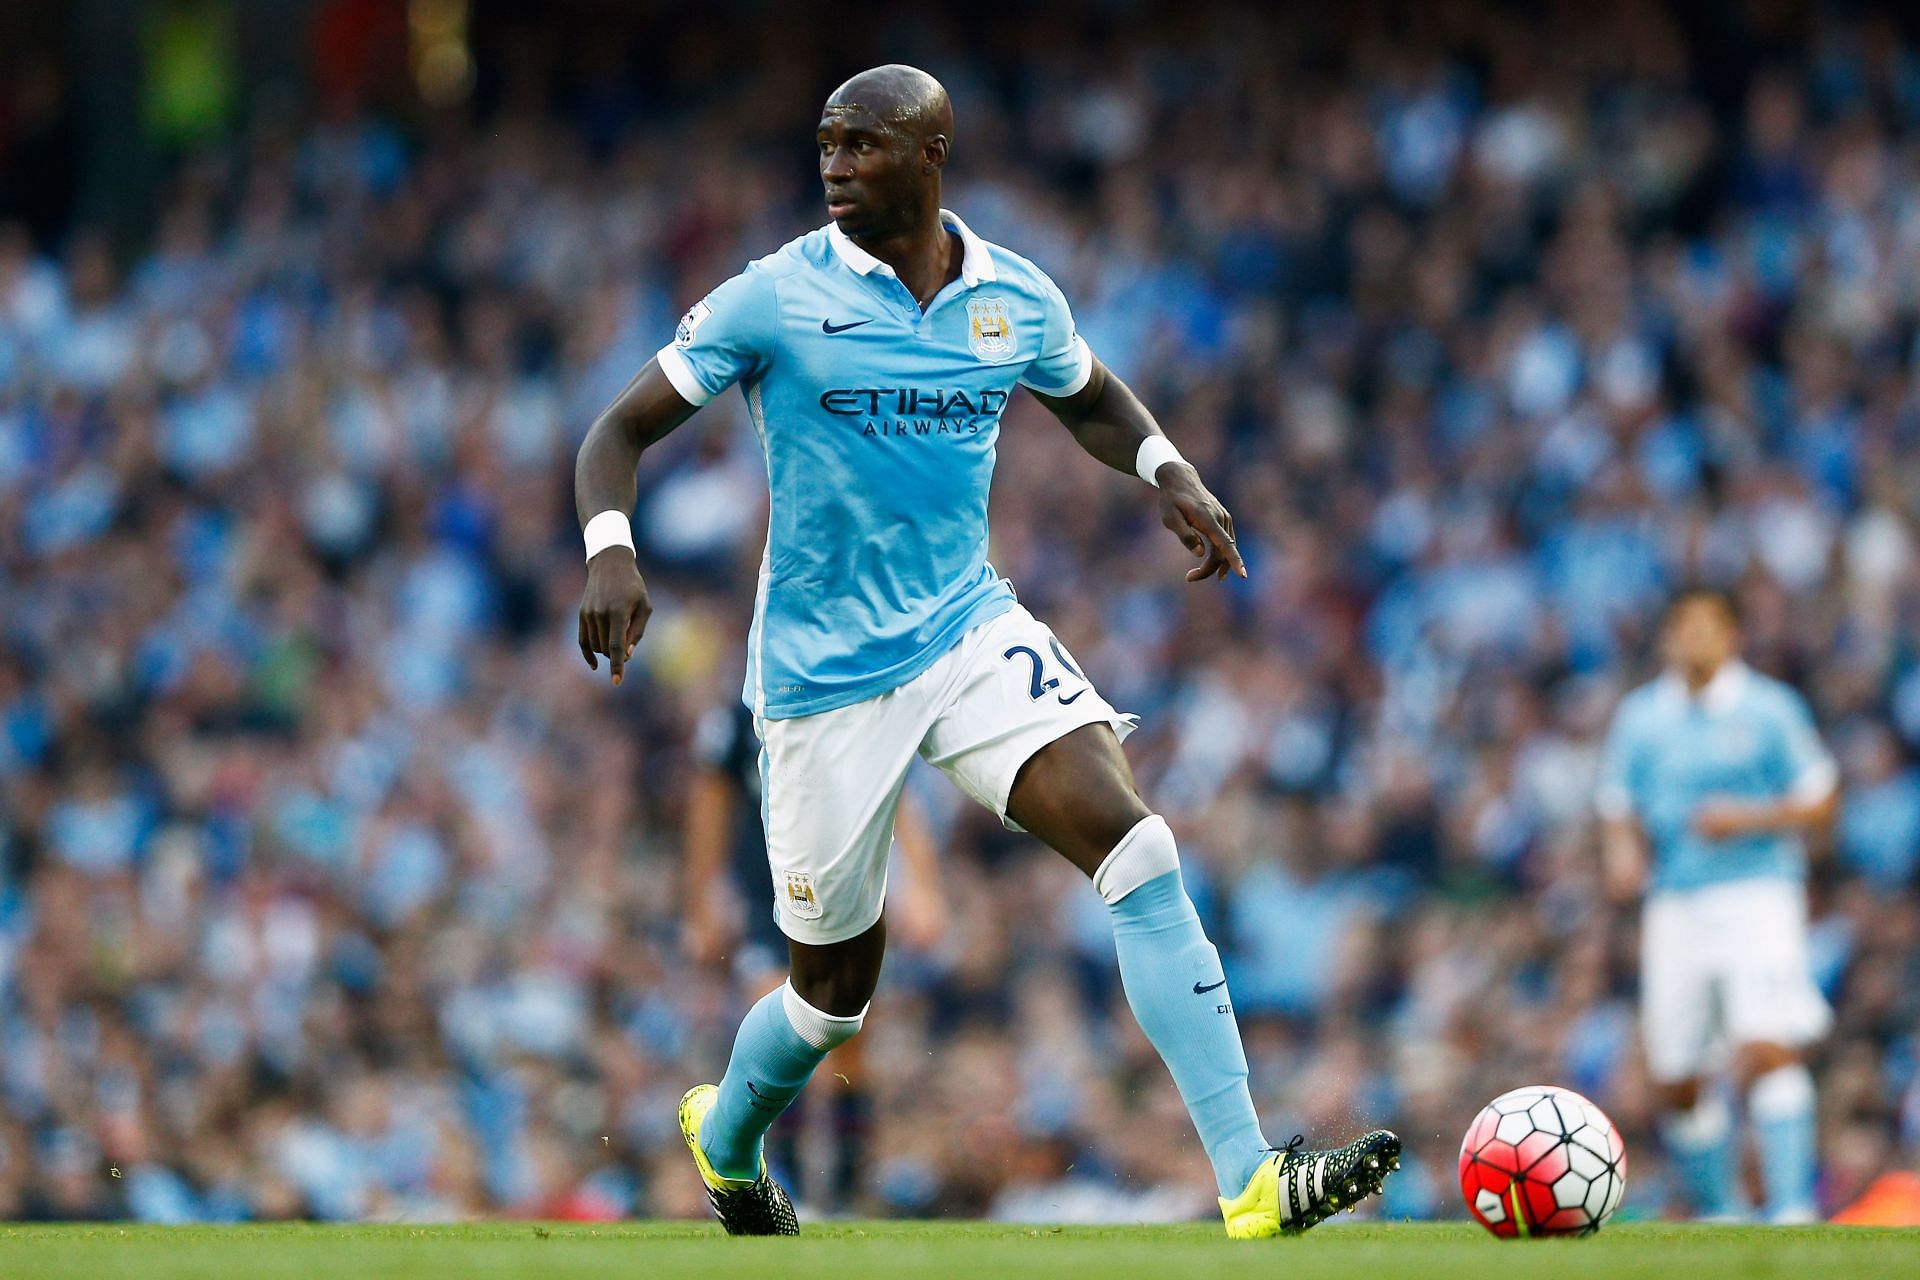 Eliaquim Mangala is one of the worst signings in the history of Manchester City